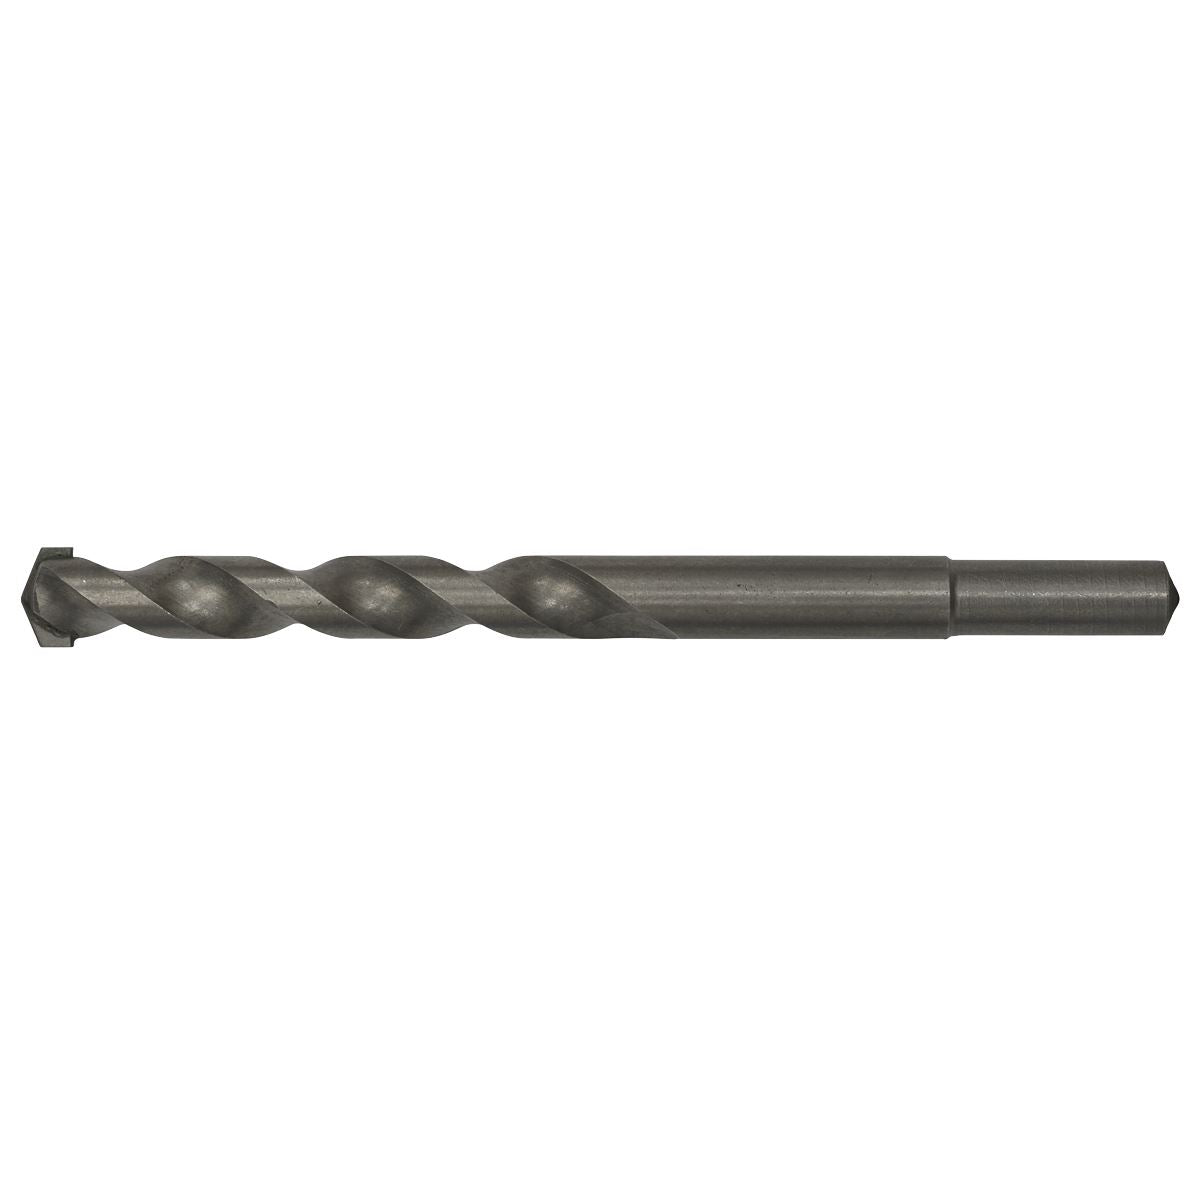 Worksafe by Sealey Straight Shank Rotary Impact Drill Bit Ø13 x 150mm